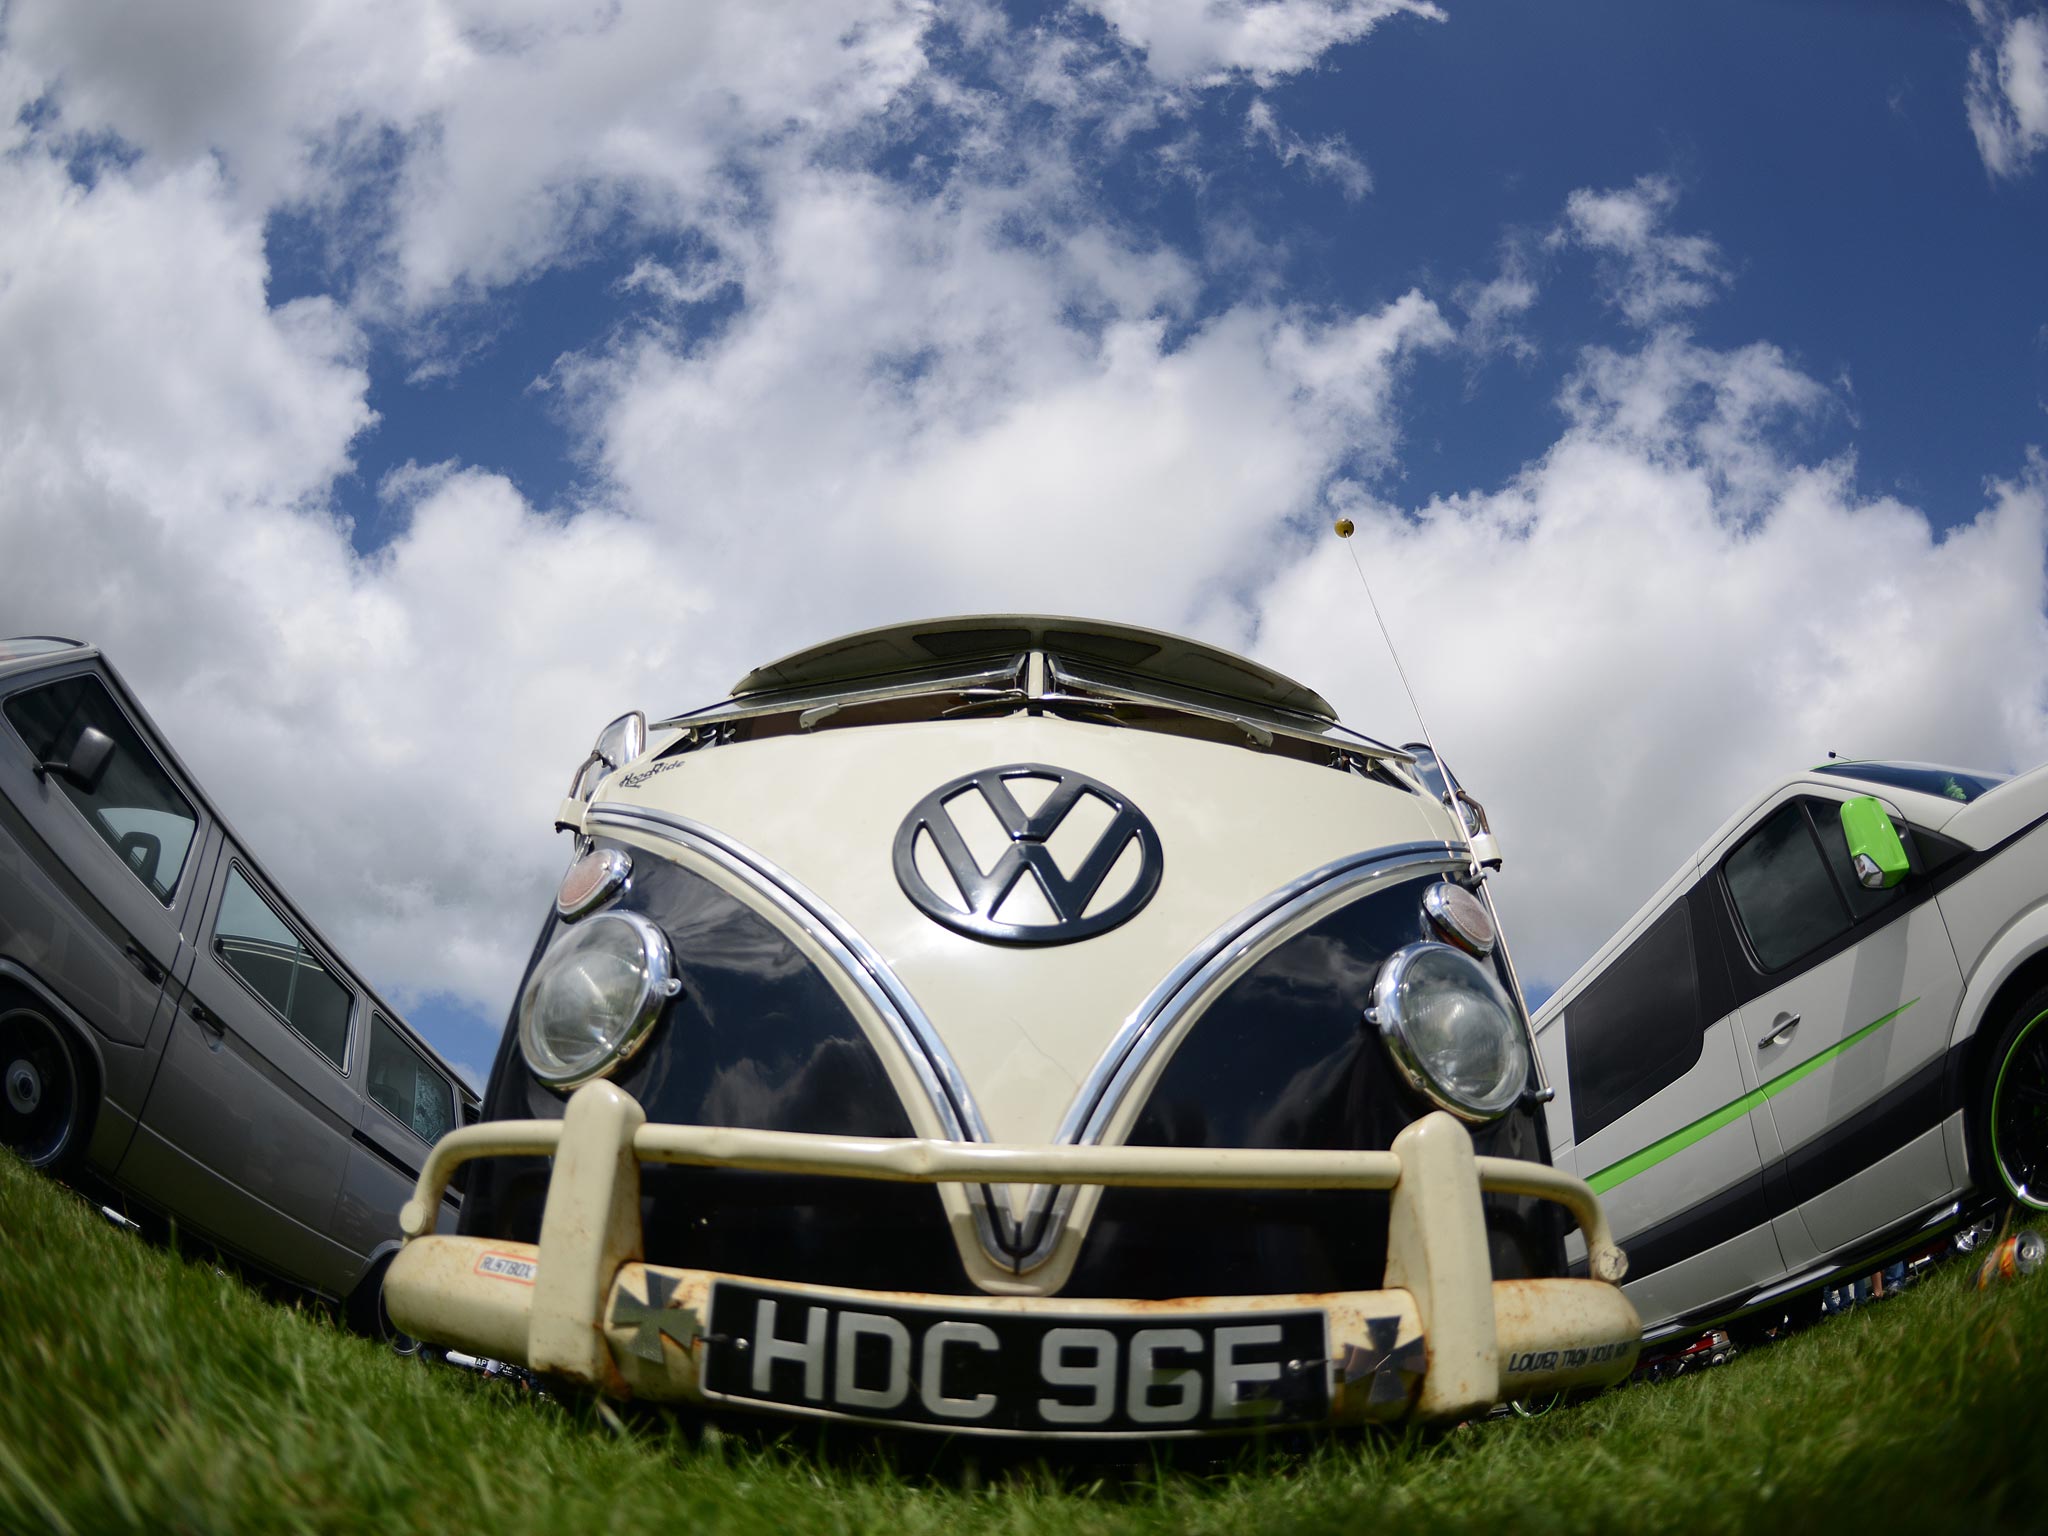 A VW campervan on display during the In Praise Of All Things VW At The Annual Festiva at Harewood Housel